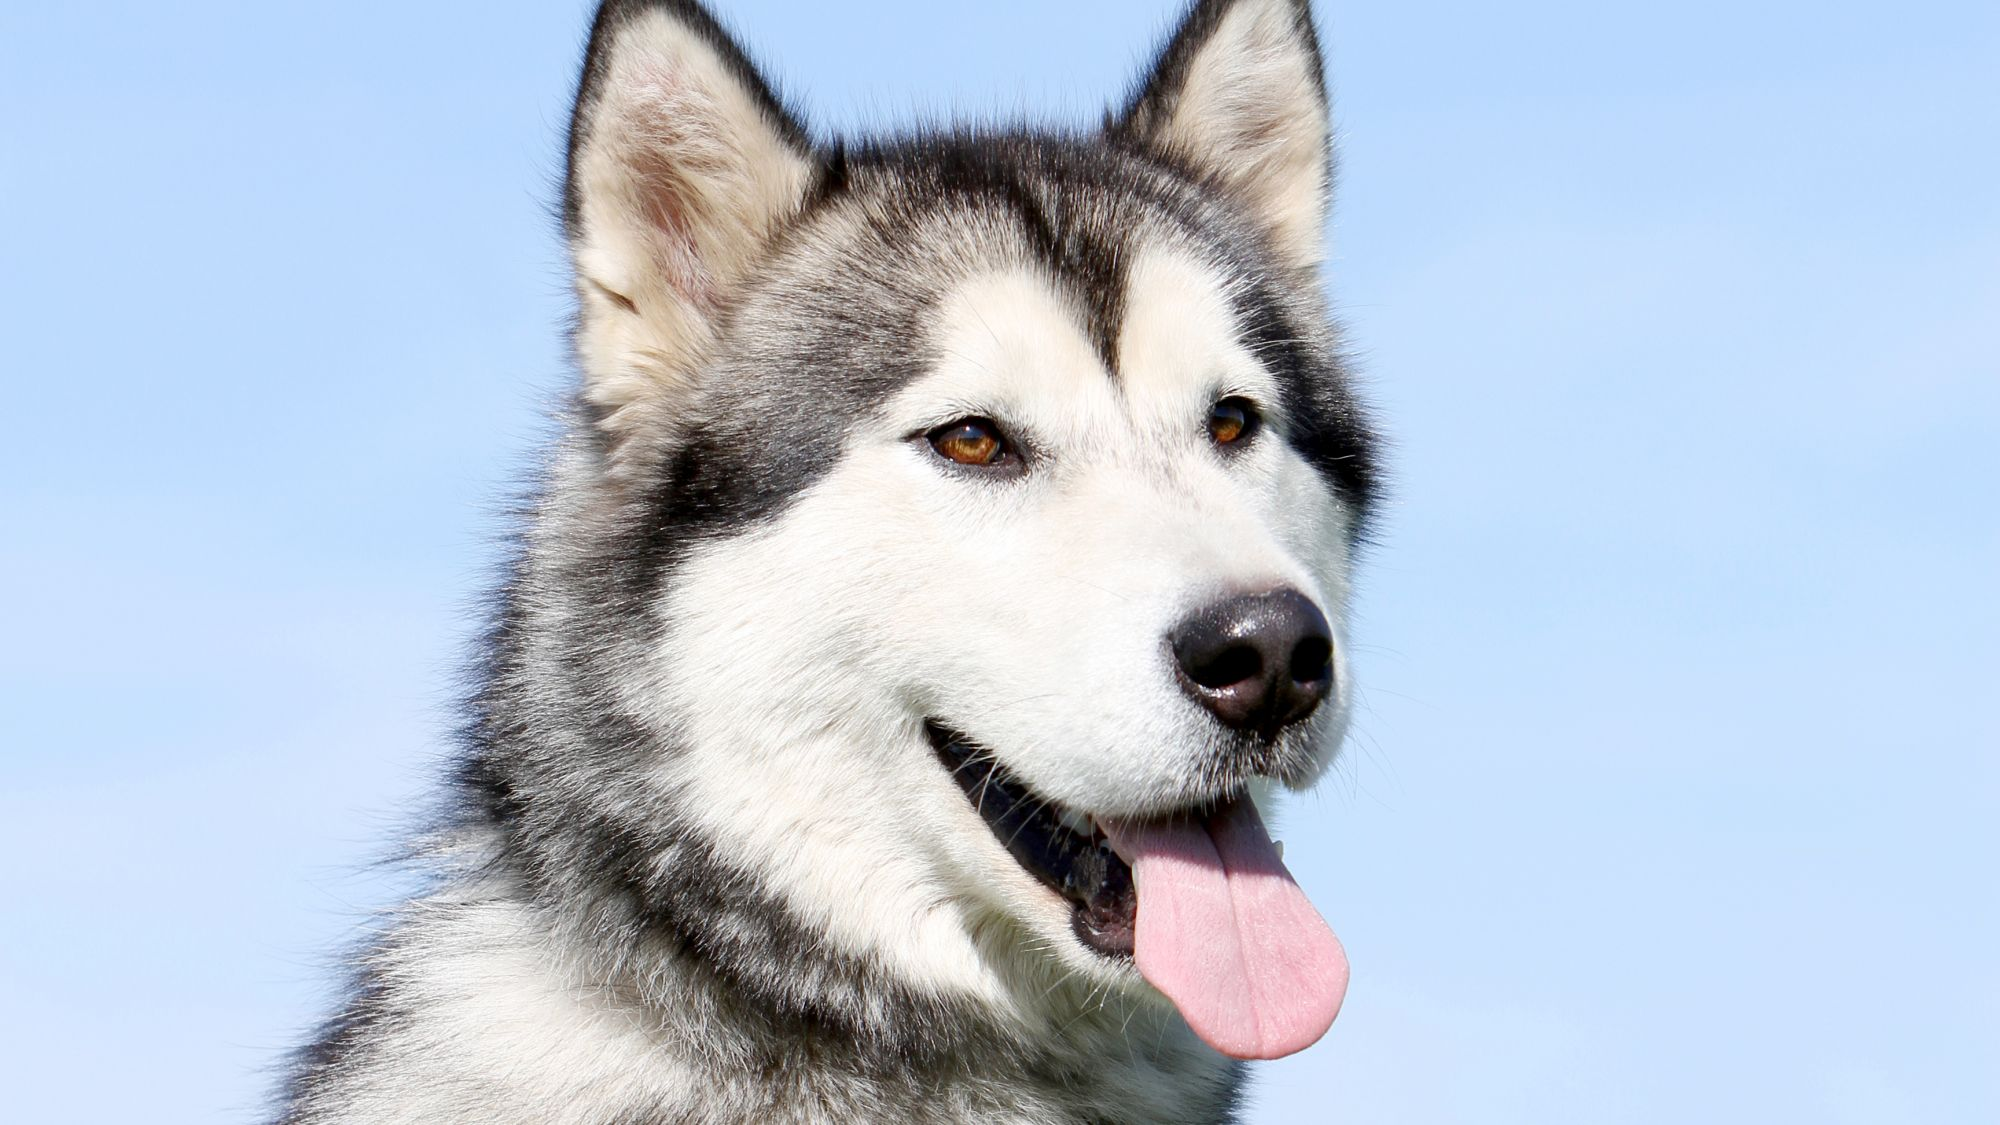 Alaskan Malamute sitting with its tongue out in front of blue sky